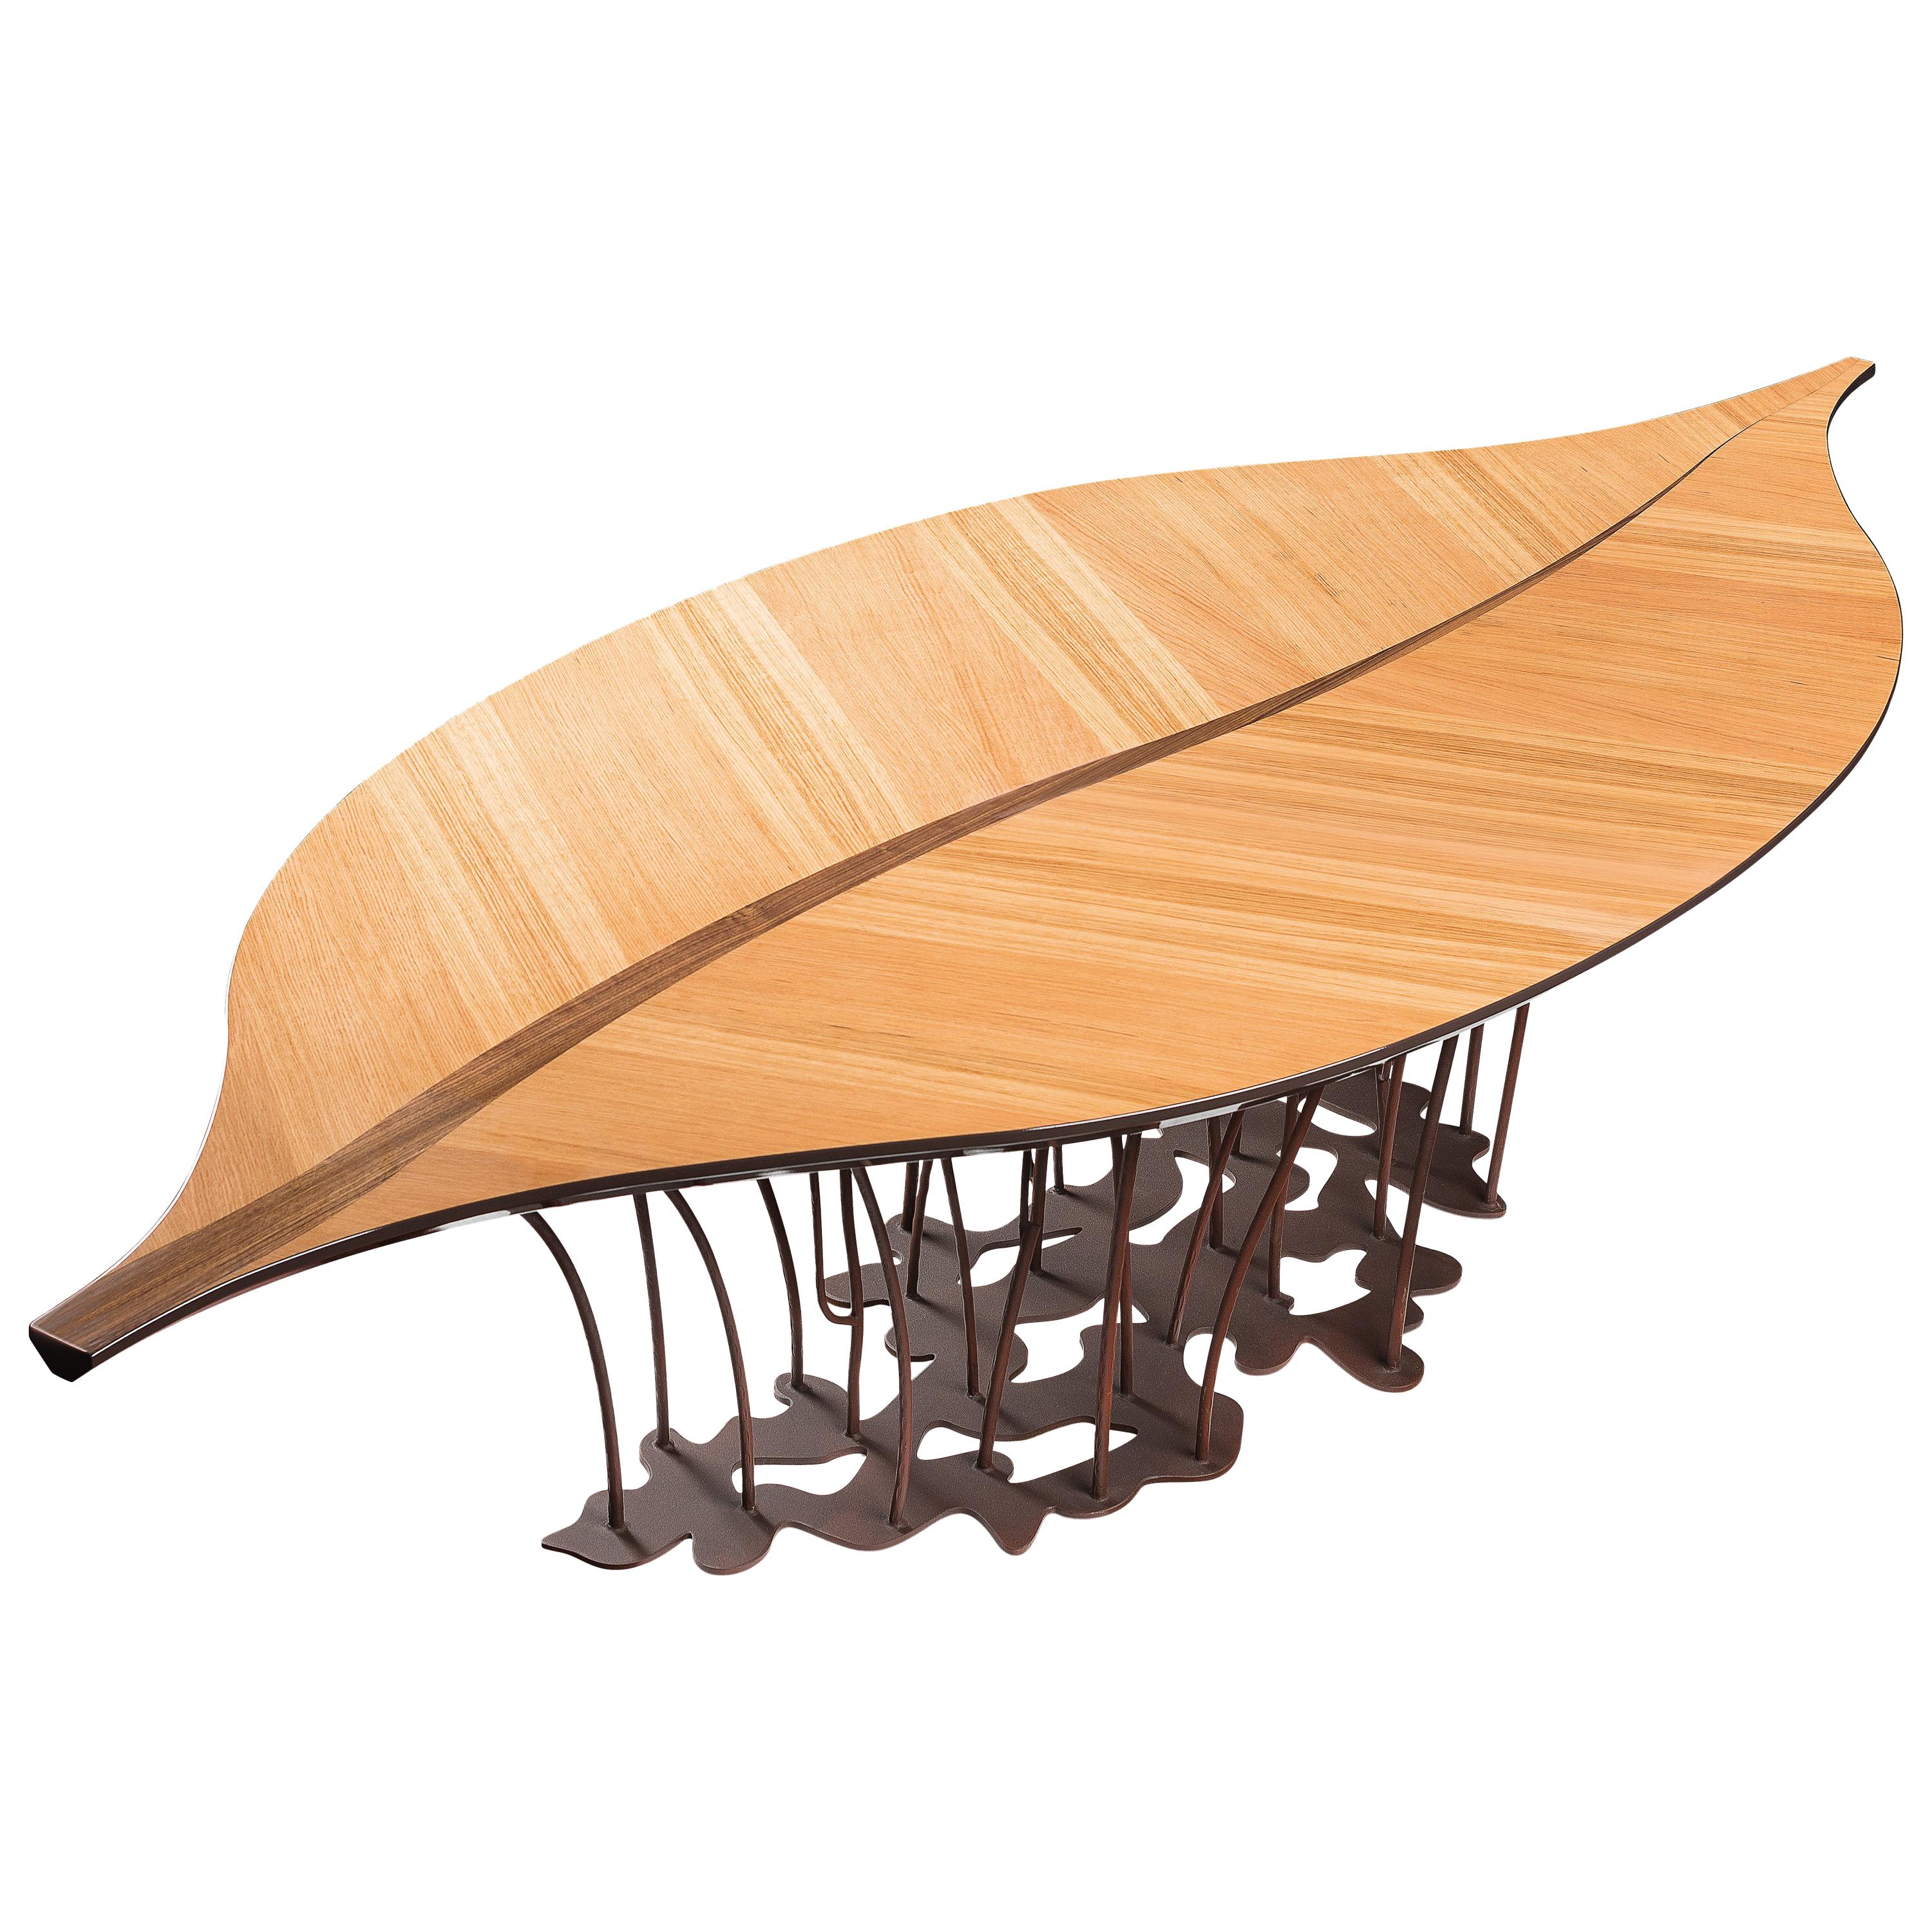 Table Leaf Fenice, Leaf Shape, Oak and Walnut Canaletto, Italy